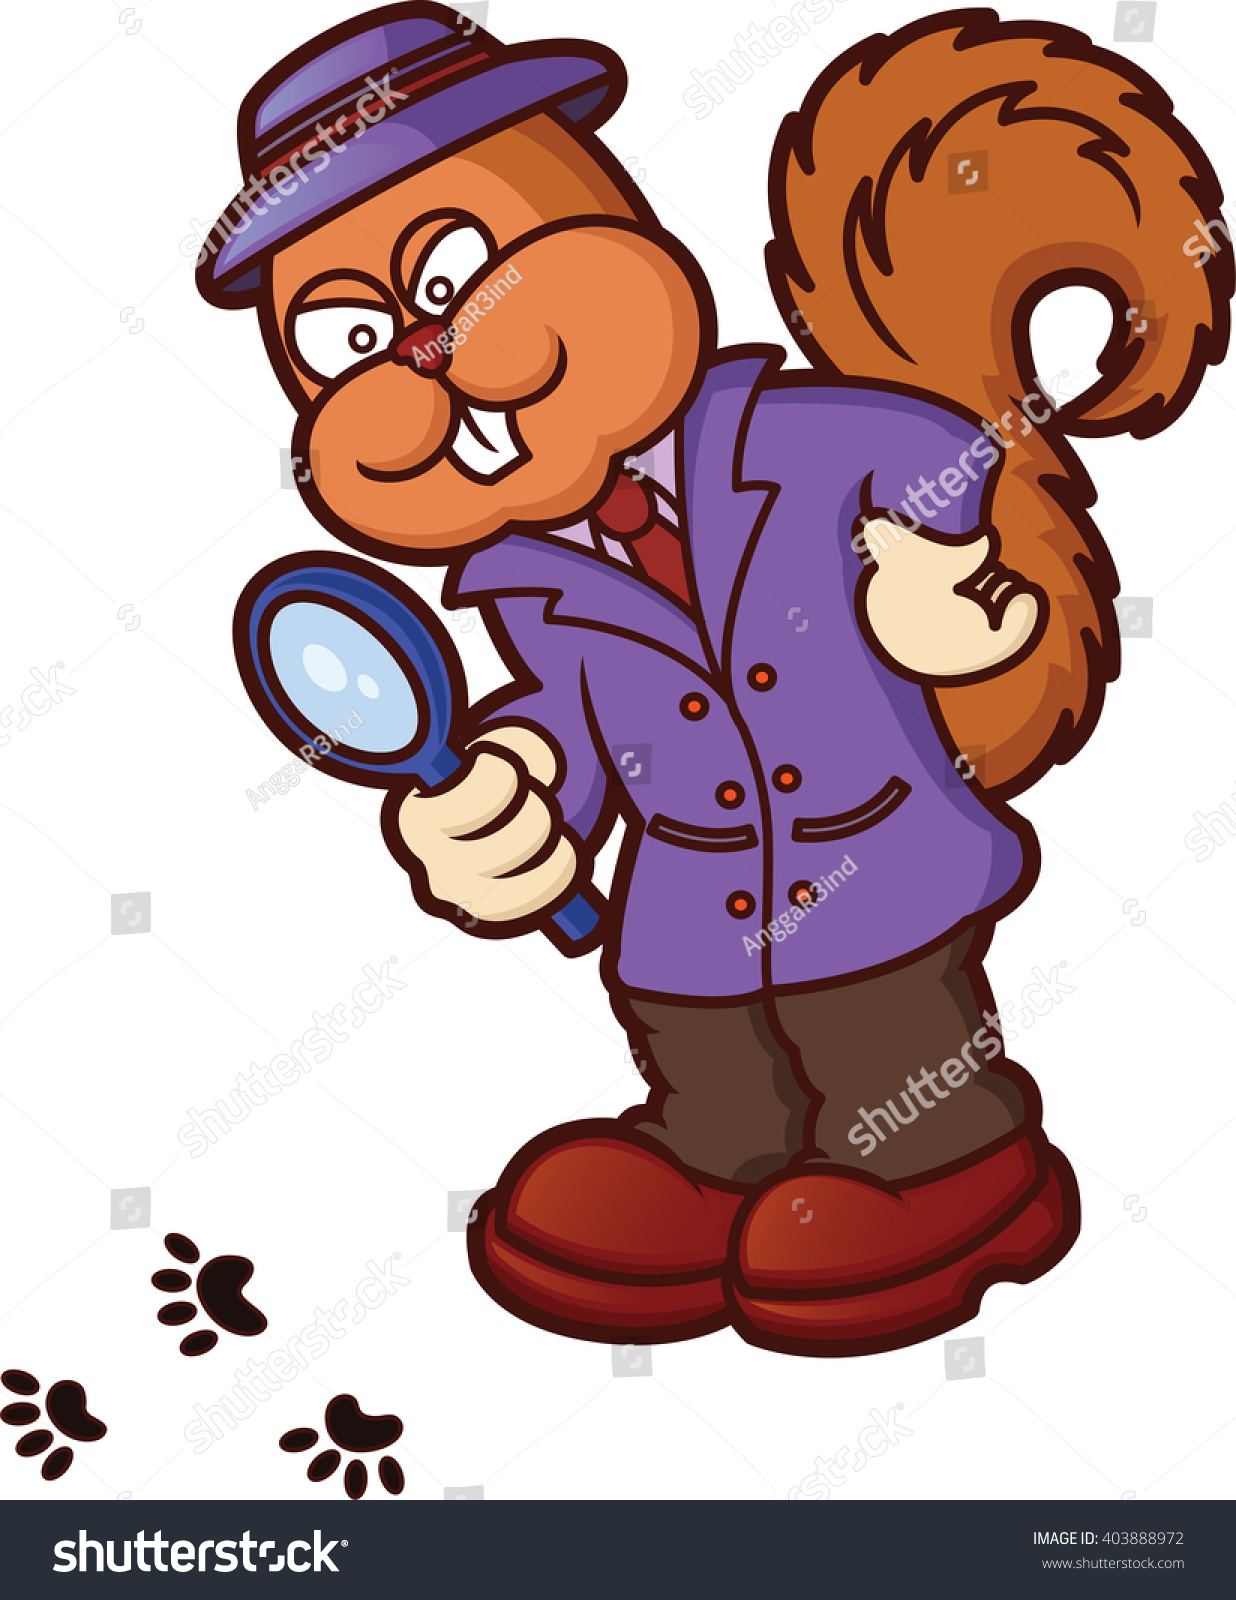 Image result for squirrel detective